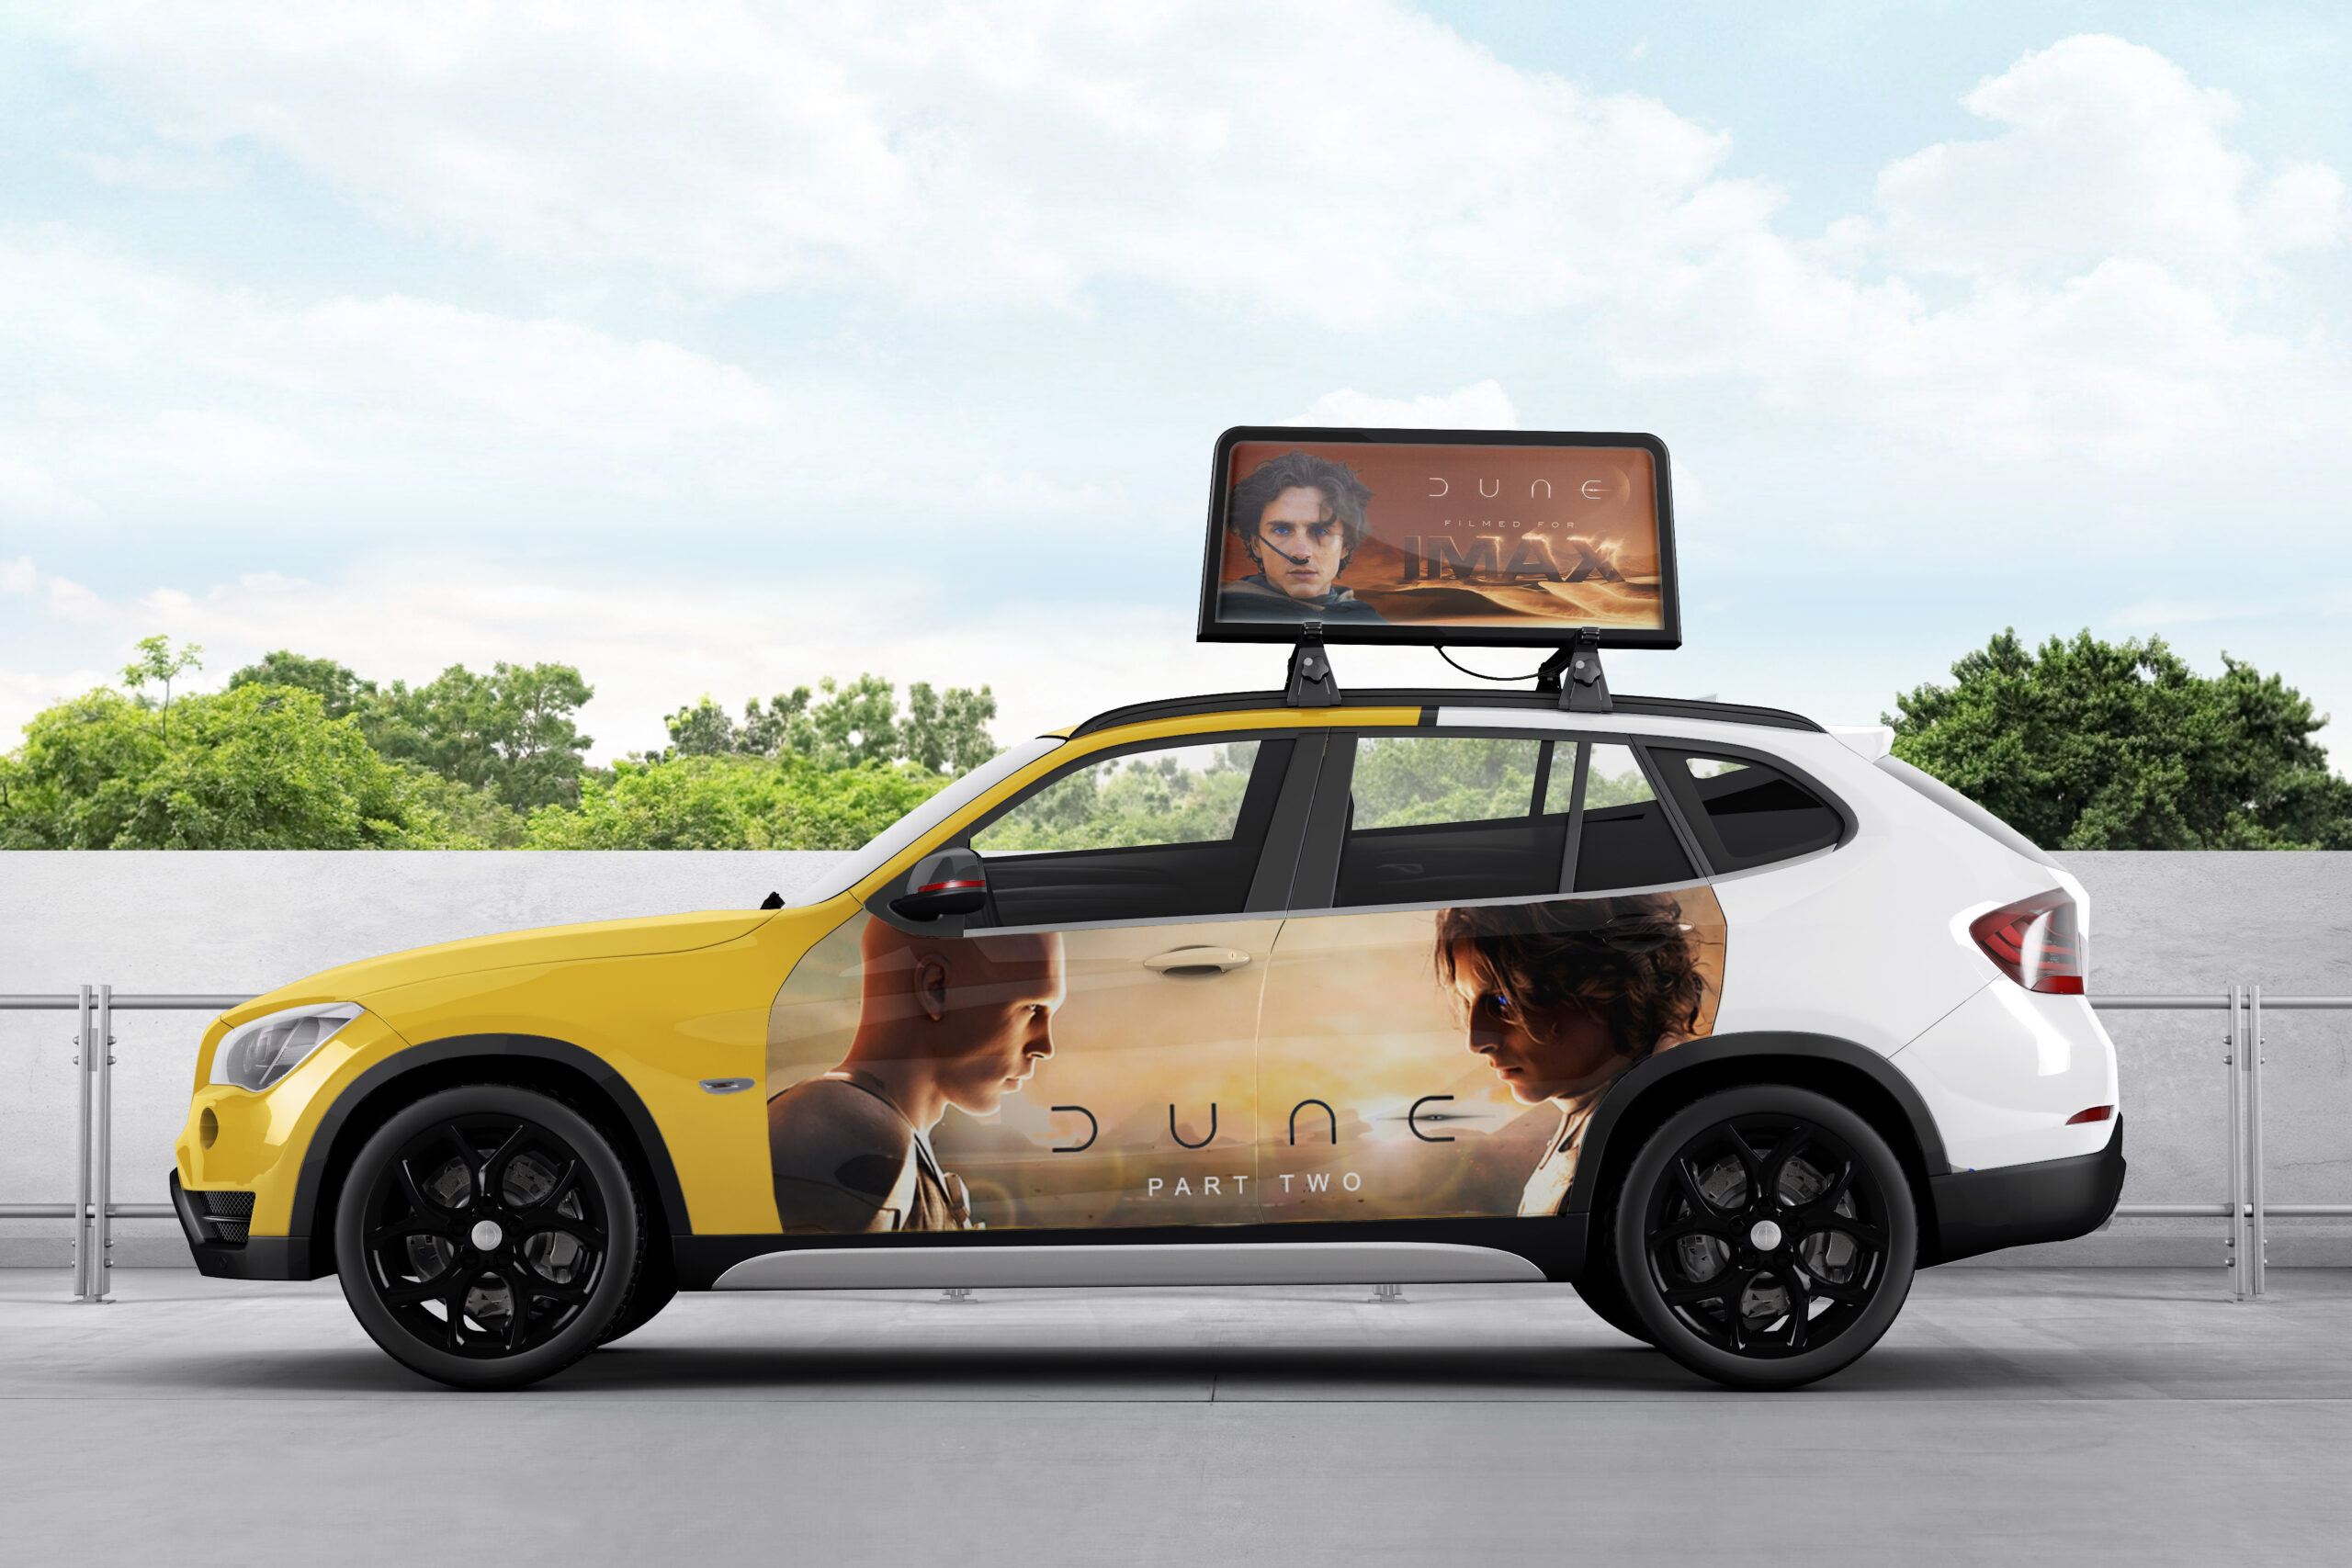 A half-yellow and half-white taxi has promotional banners for the new movie release "Dune: Part 2" on the top and the taxi door.